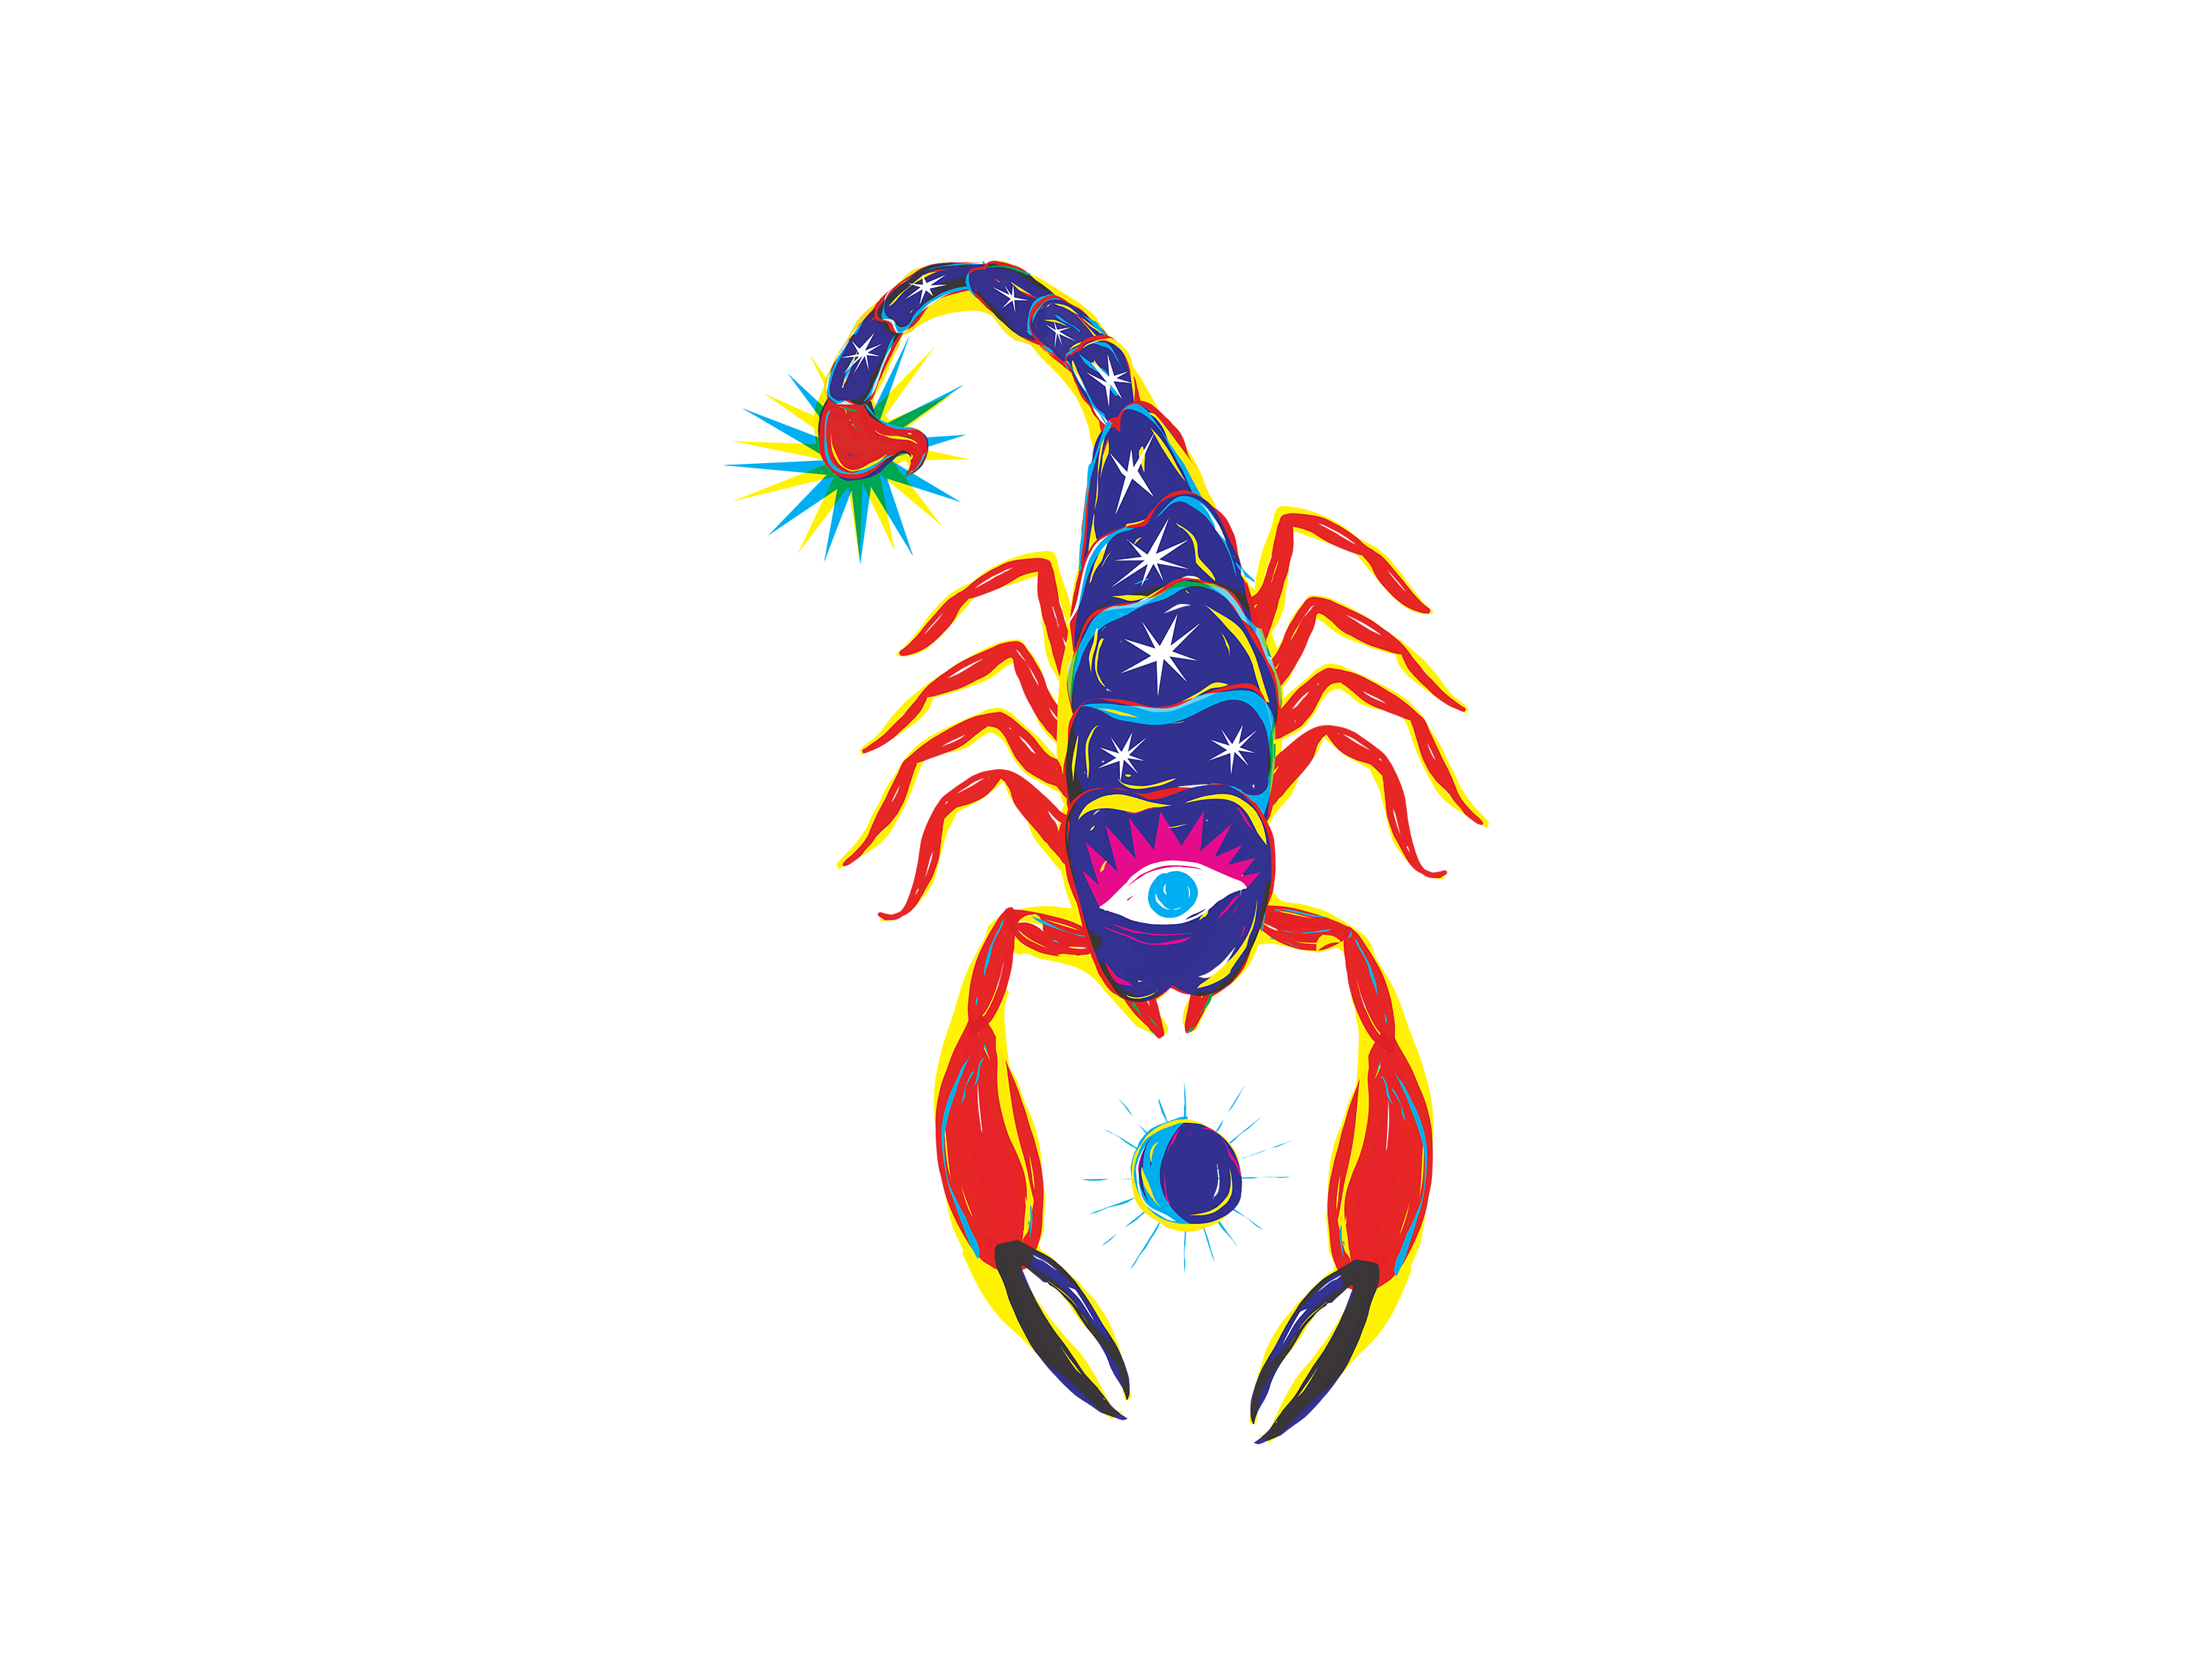 A colorful scorpio with a blue eye in the middle.